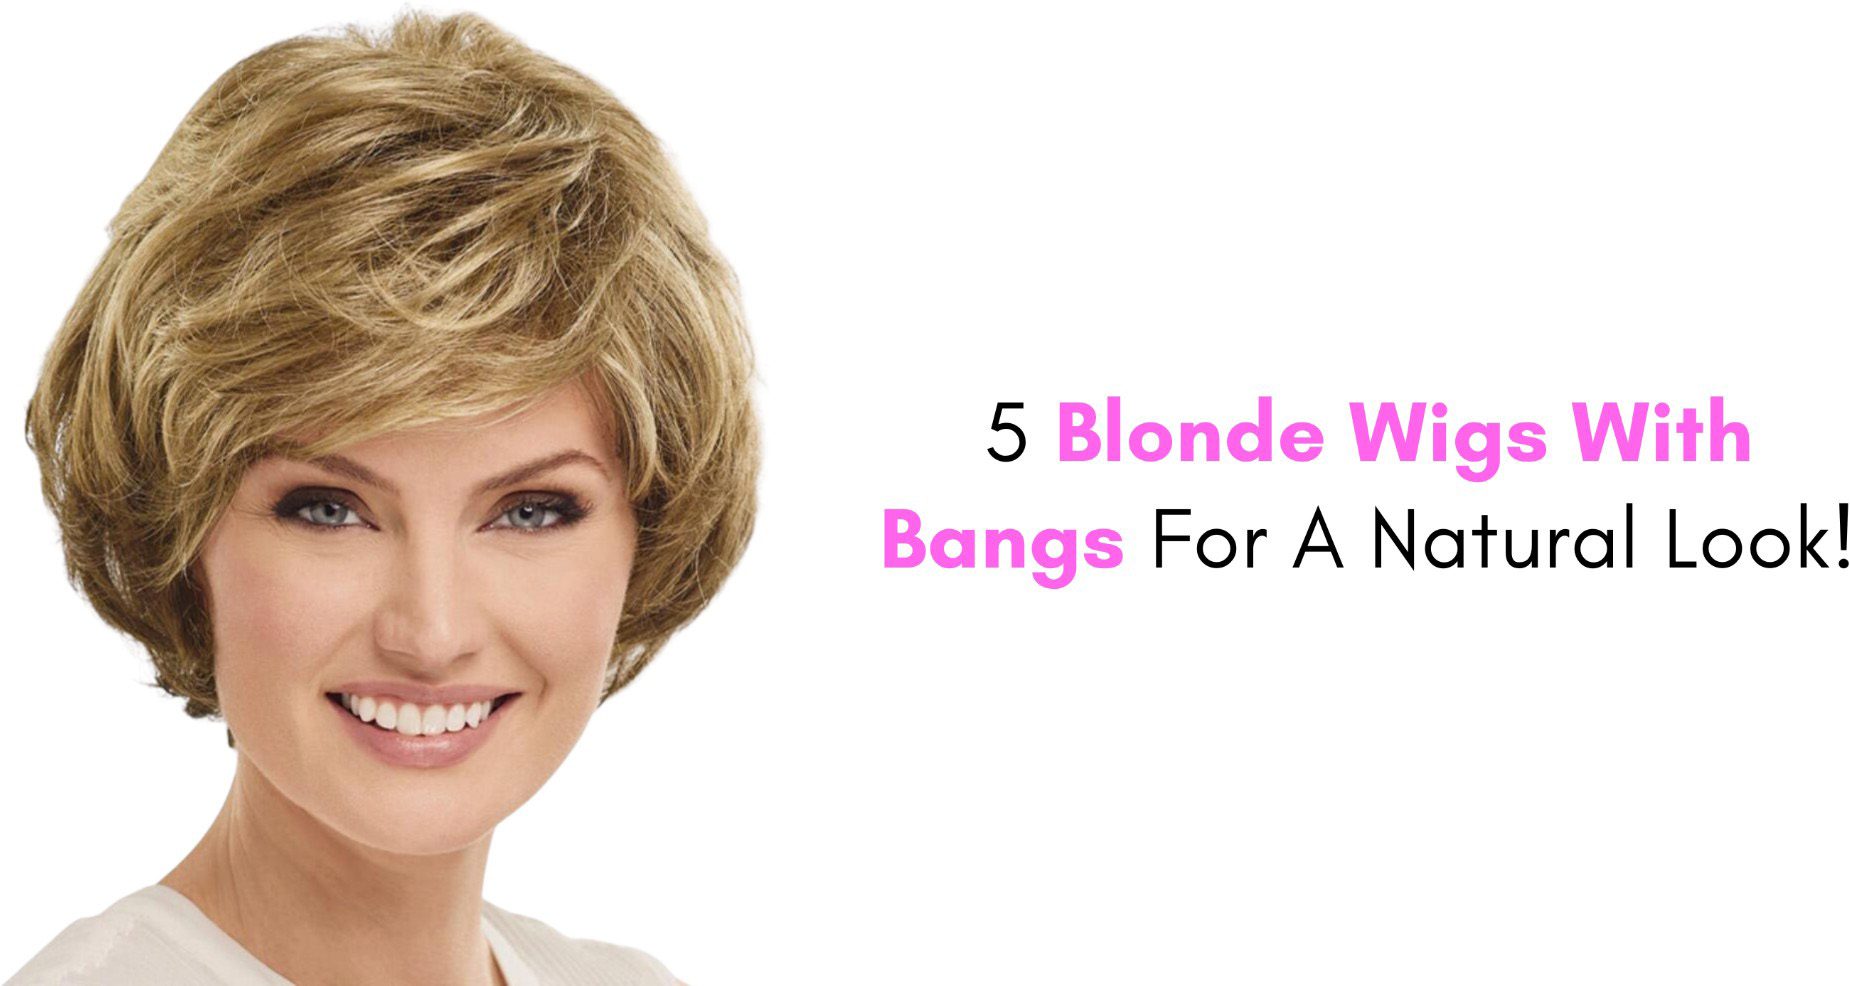 5 blonde wigs with bangs for a natural look